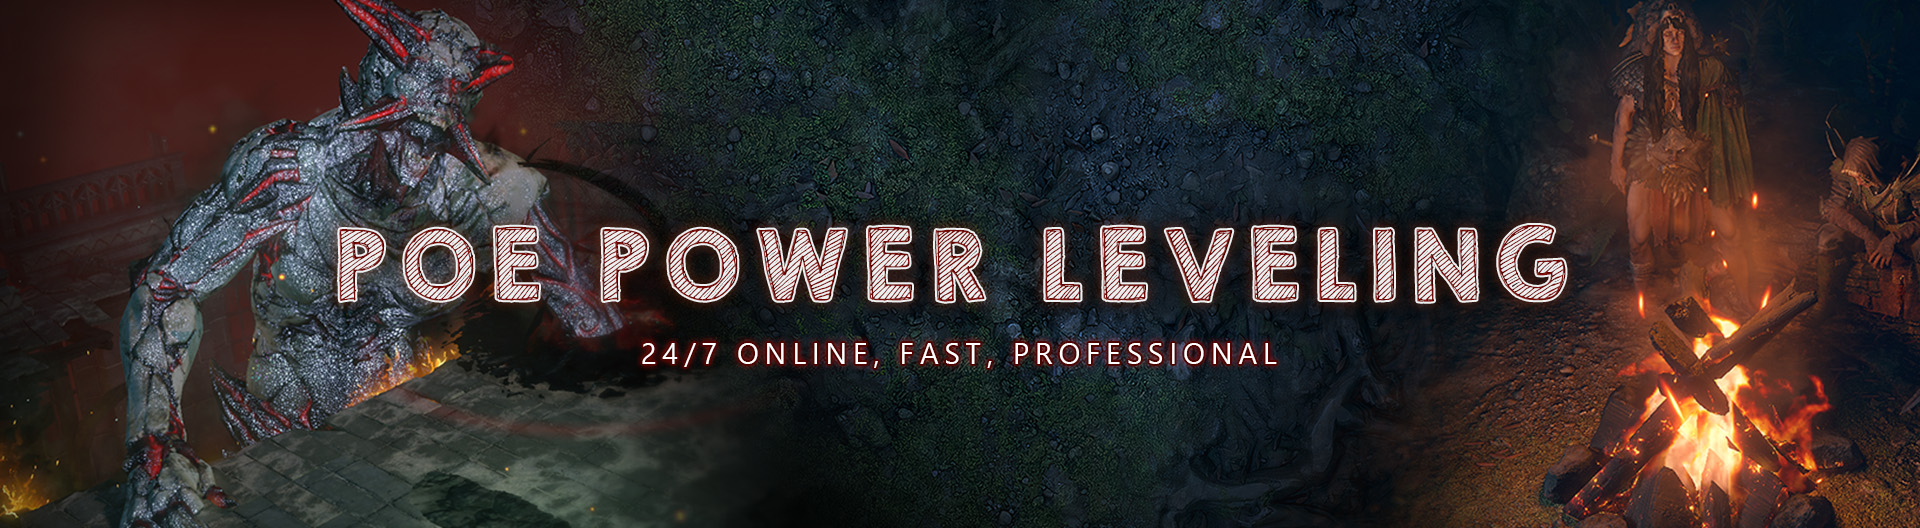 Buy PoE Power leveling in Affliction